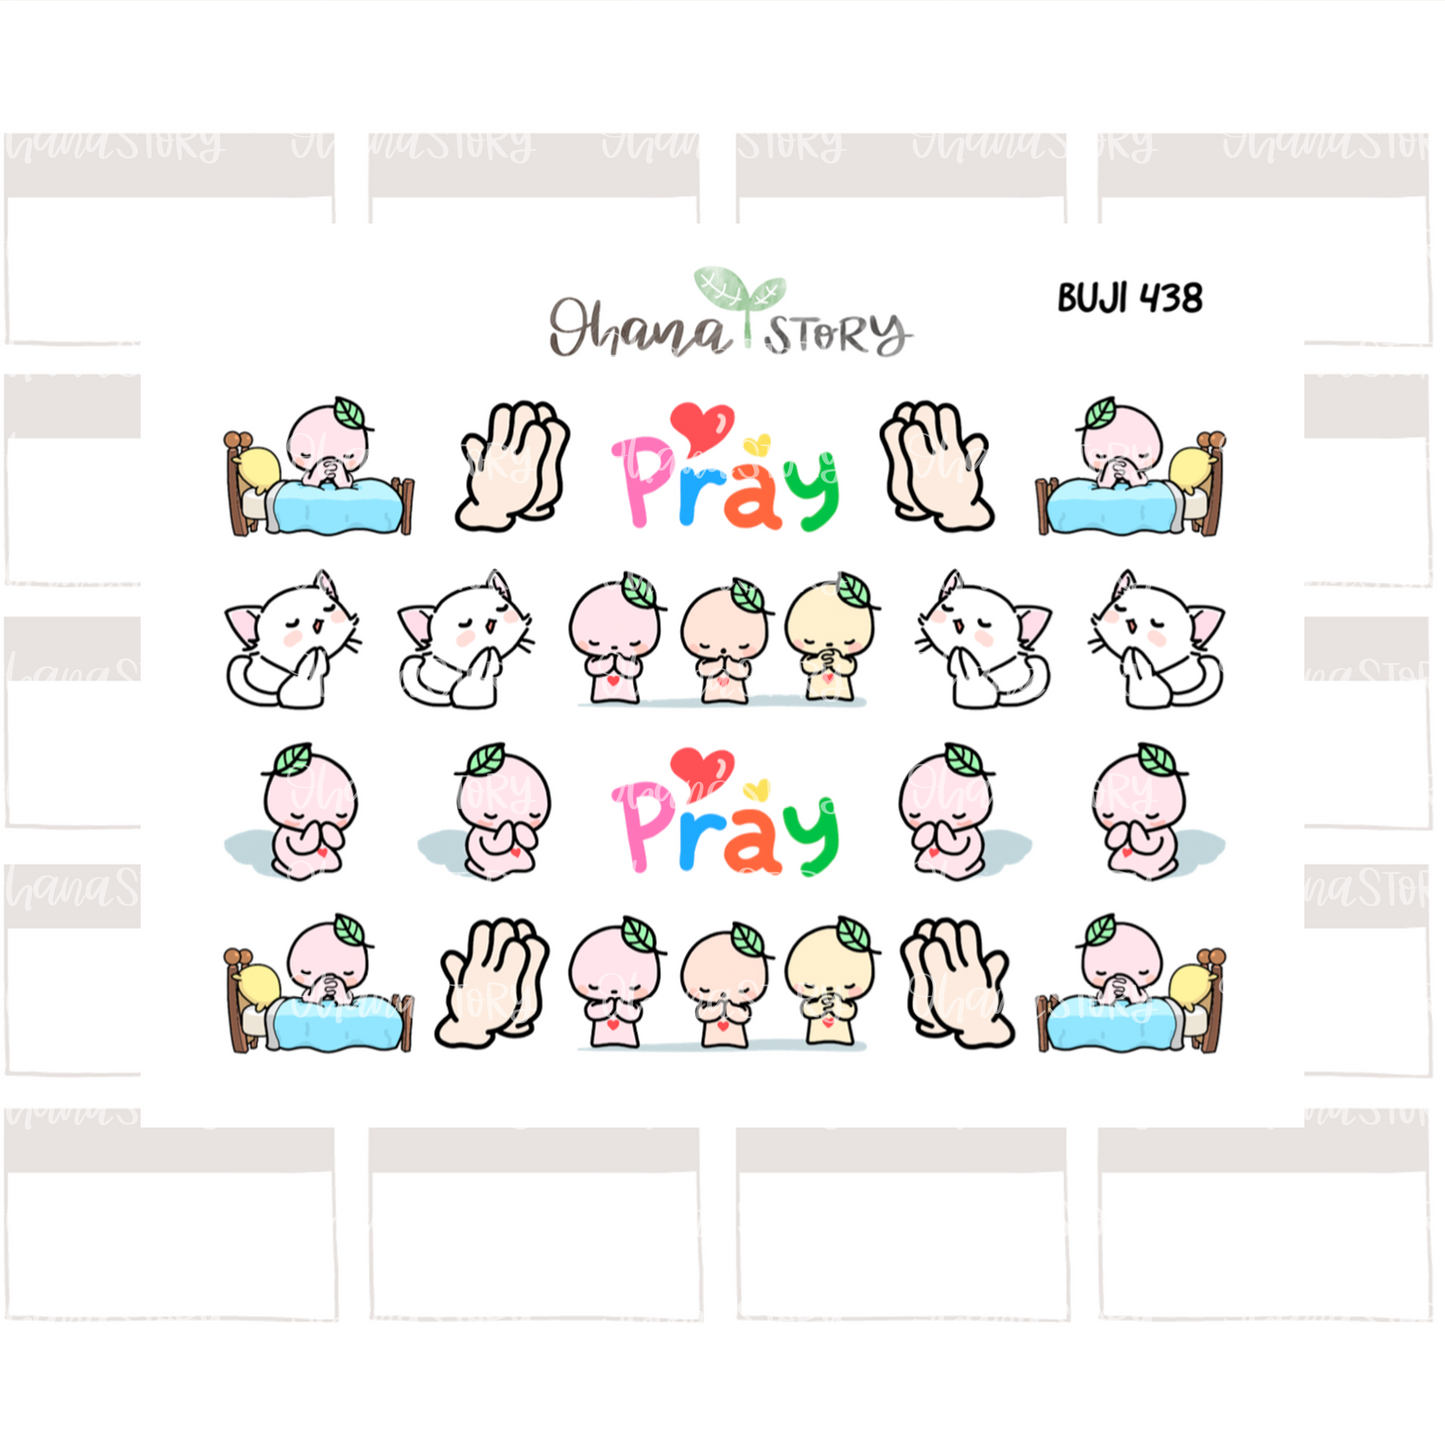 BUJI 438 | Pray For The World | Hand Drawn Planner Stickers